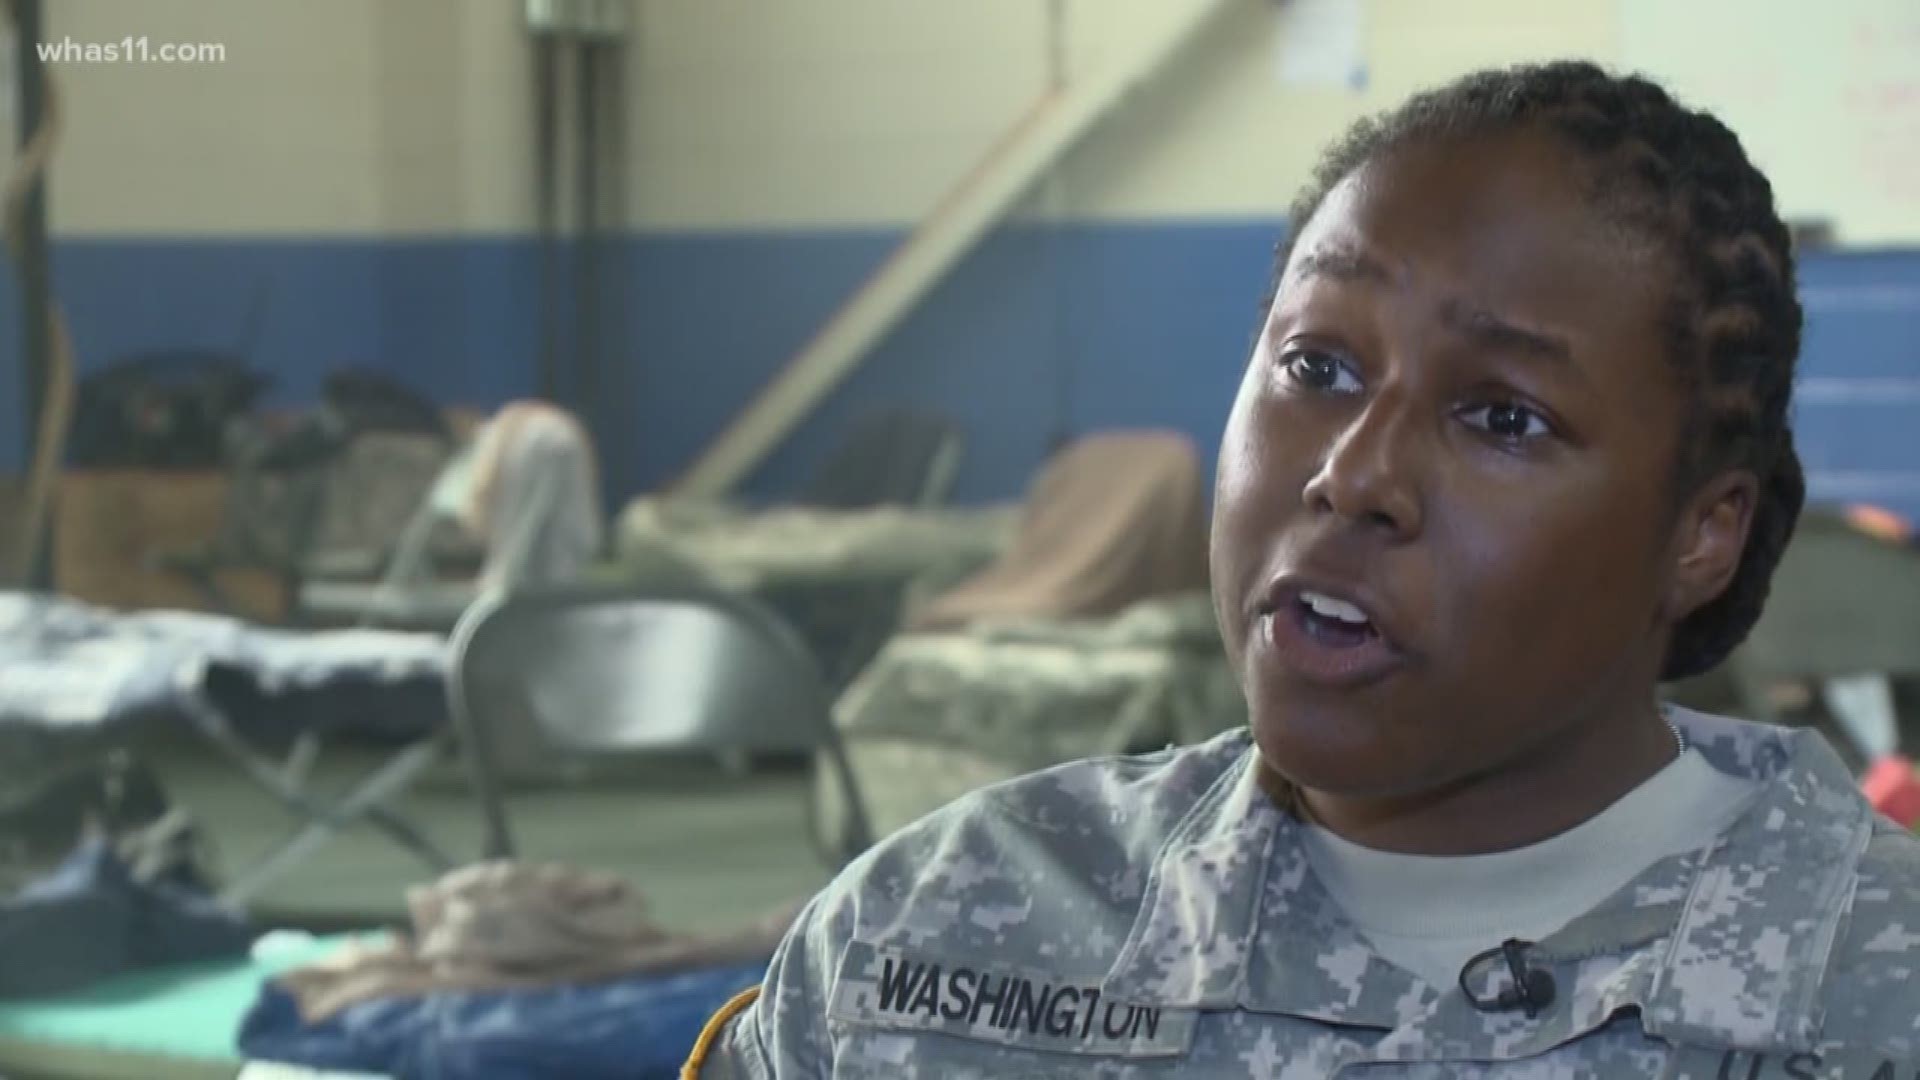 WHAS11's Lisa Hutson spoke with Sgt. Marquita Washington as she returned to her home state of North Carolina to help the place she loves.